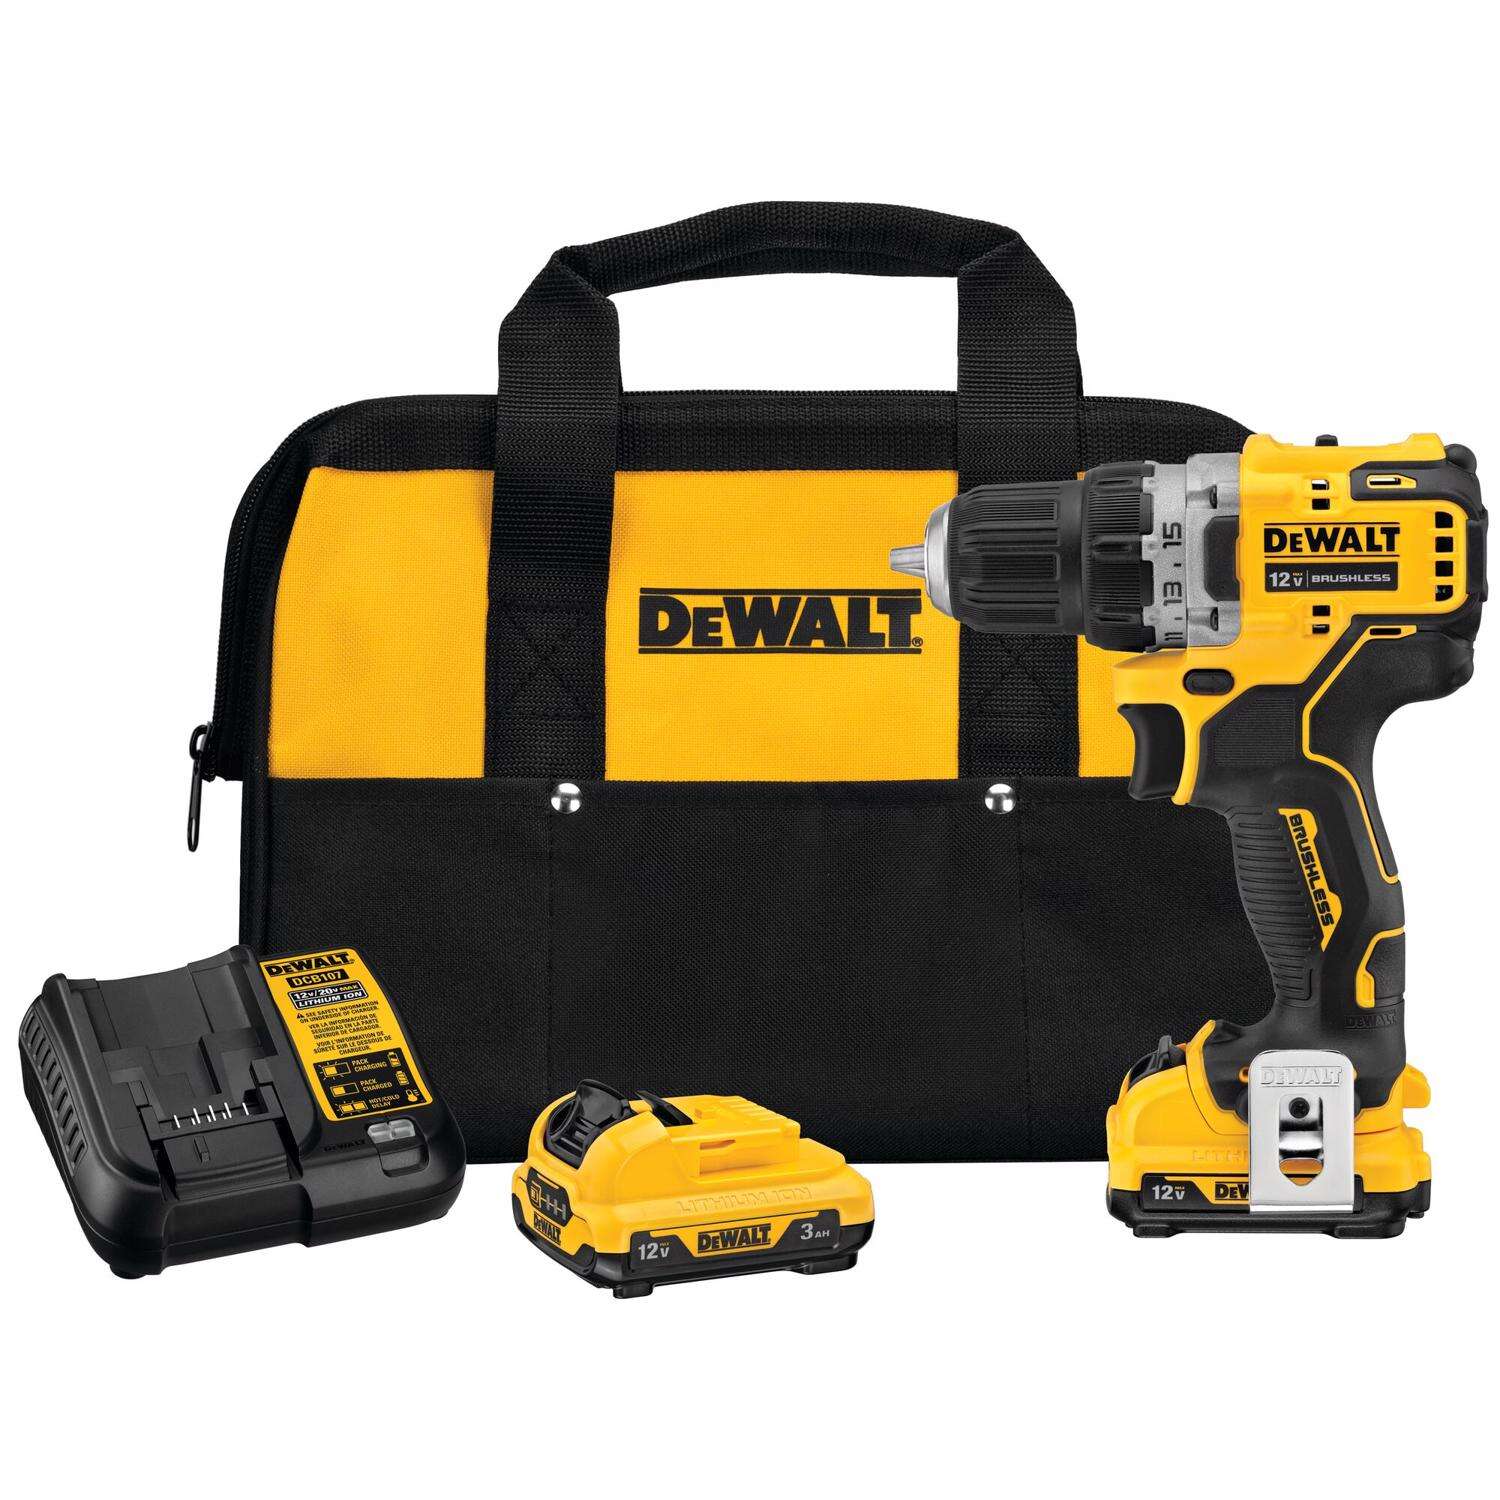 Ace Rewards Members: DEWALT 12V MAX Xtreme 12 V 3/8 in. Brushless Cordless Drill/Driver Kit (Battery & Charger) $98.99 + Free Shipping